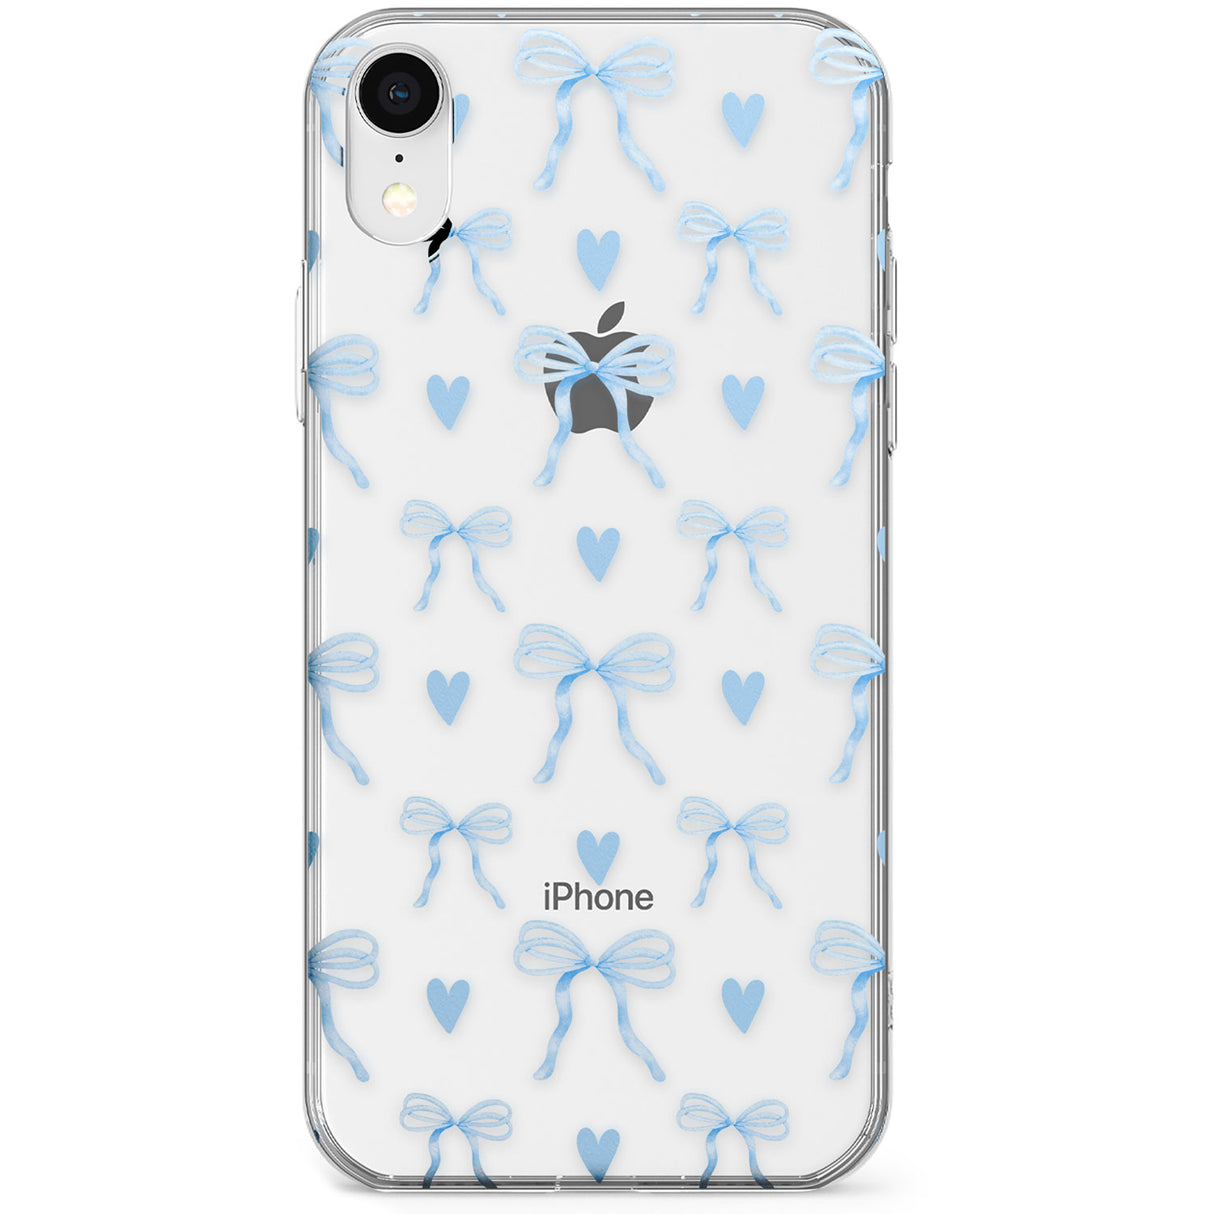 Blue Bows & Hearts Phone Case for iPhone X, XS Max, XR